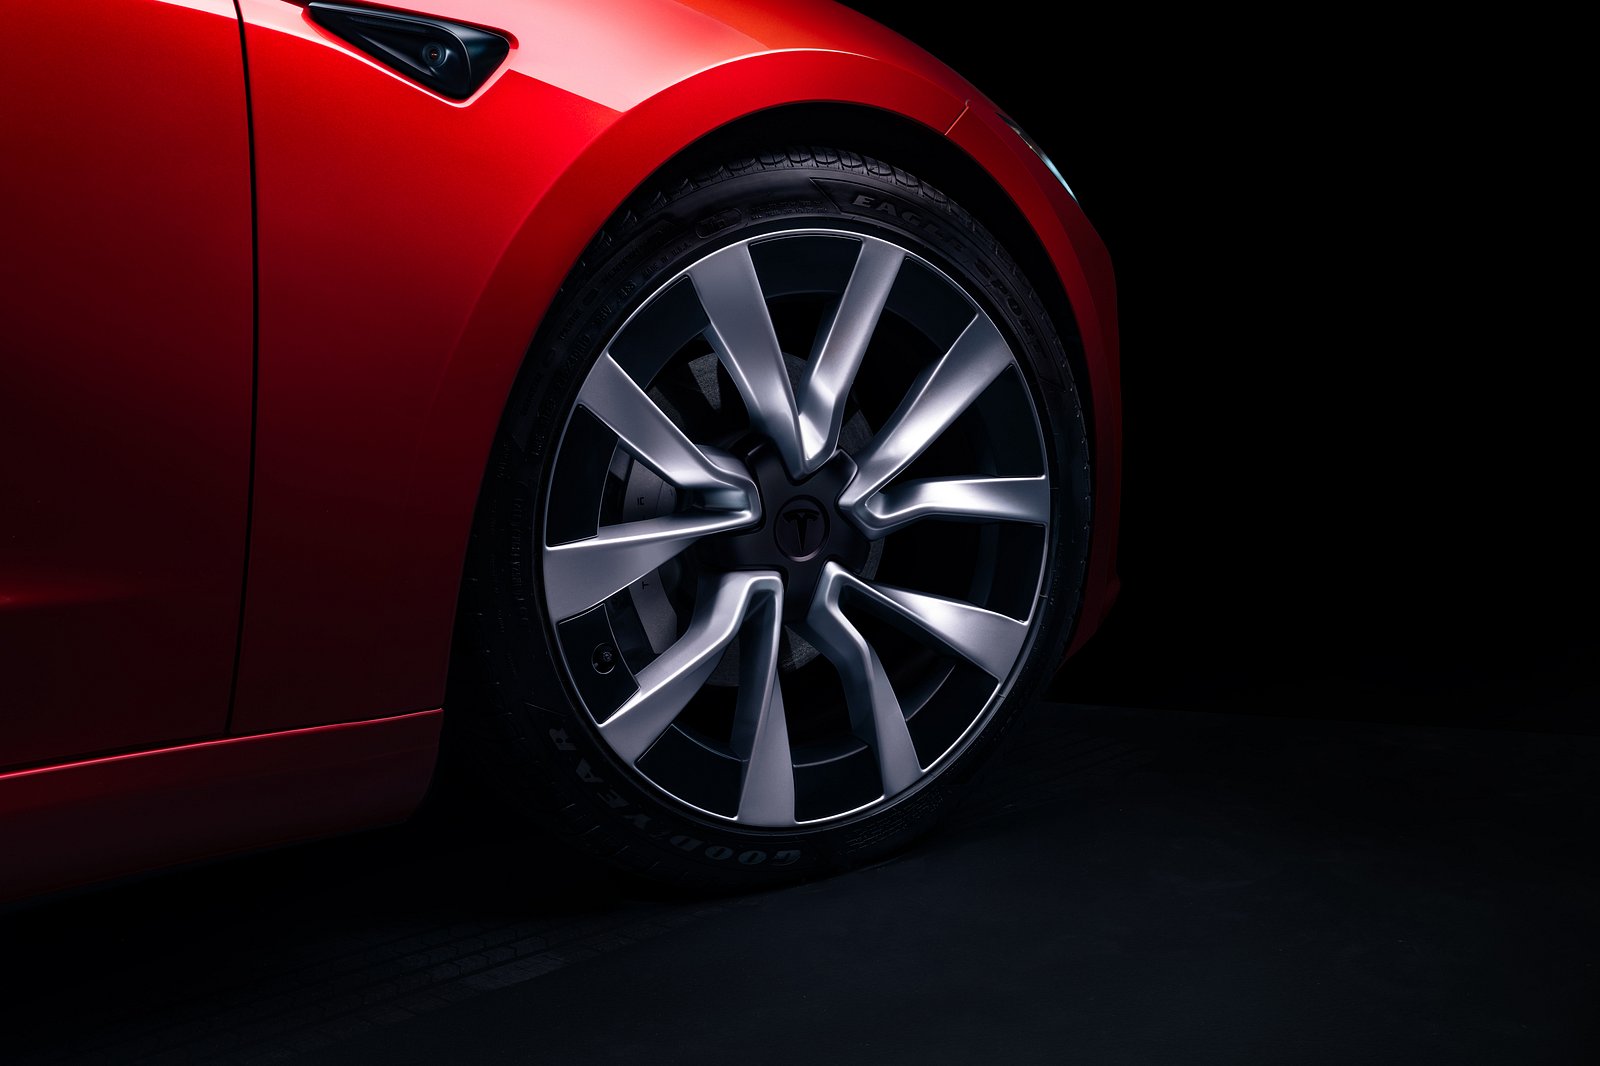 The Internet Fixes The Tesla Model 3's Controversial Styling